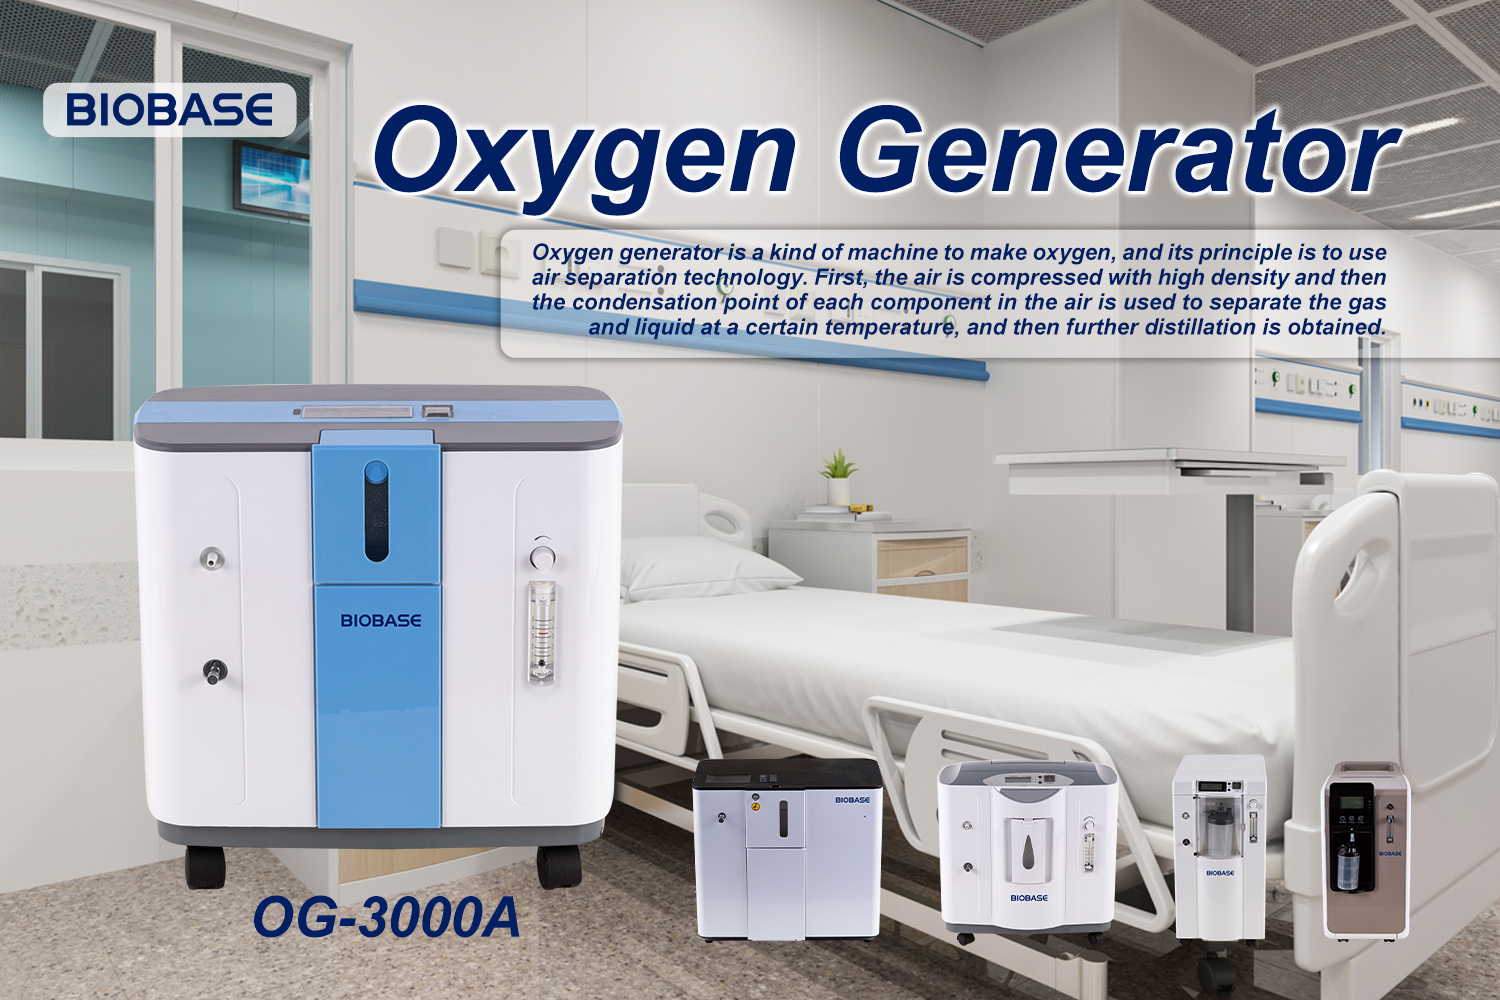 Oxygen Concentrator Buying Guide: Here's How To Choose The The Right One